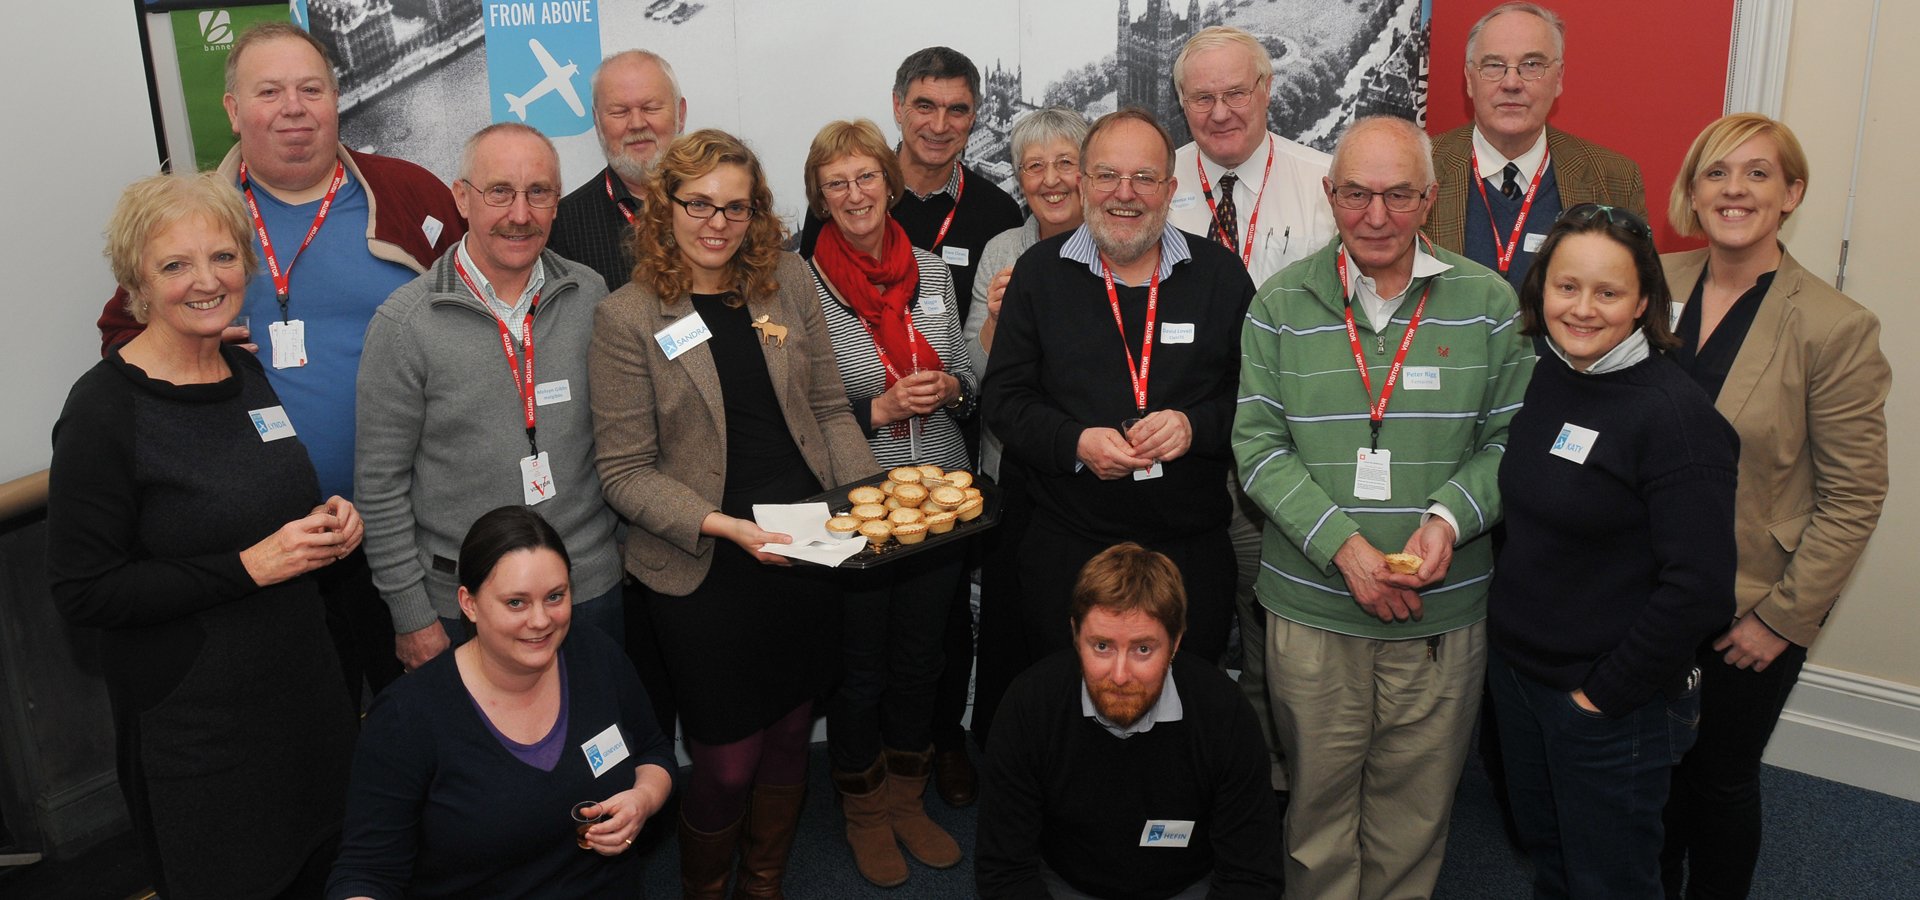 Britain from Above virtual volunteers and Project Team members at a volunteer event, November 2013